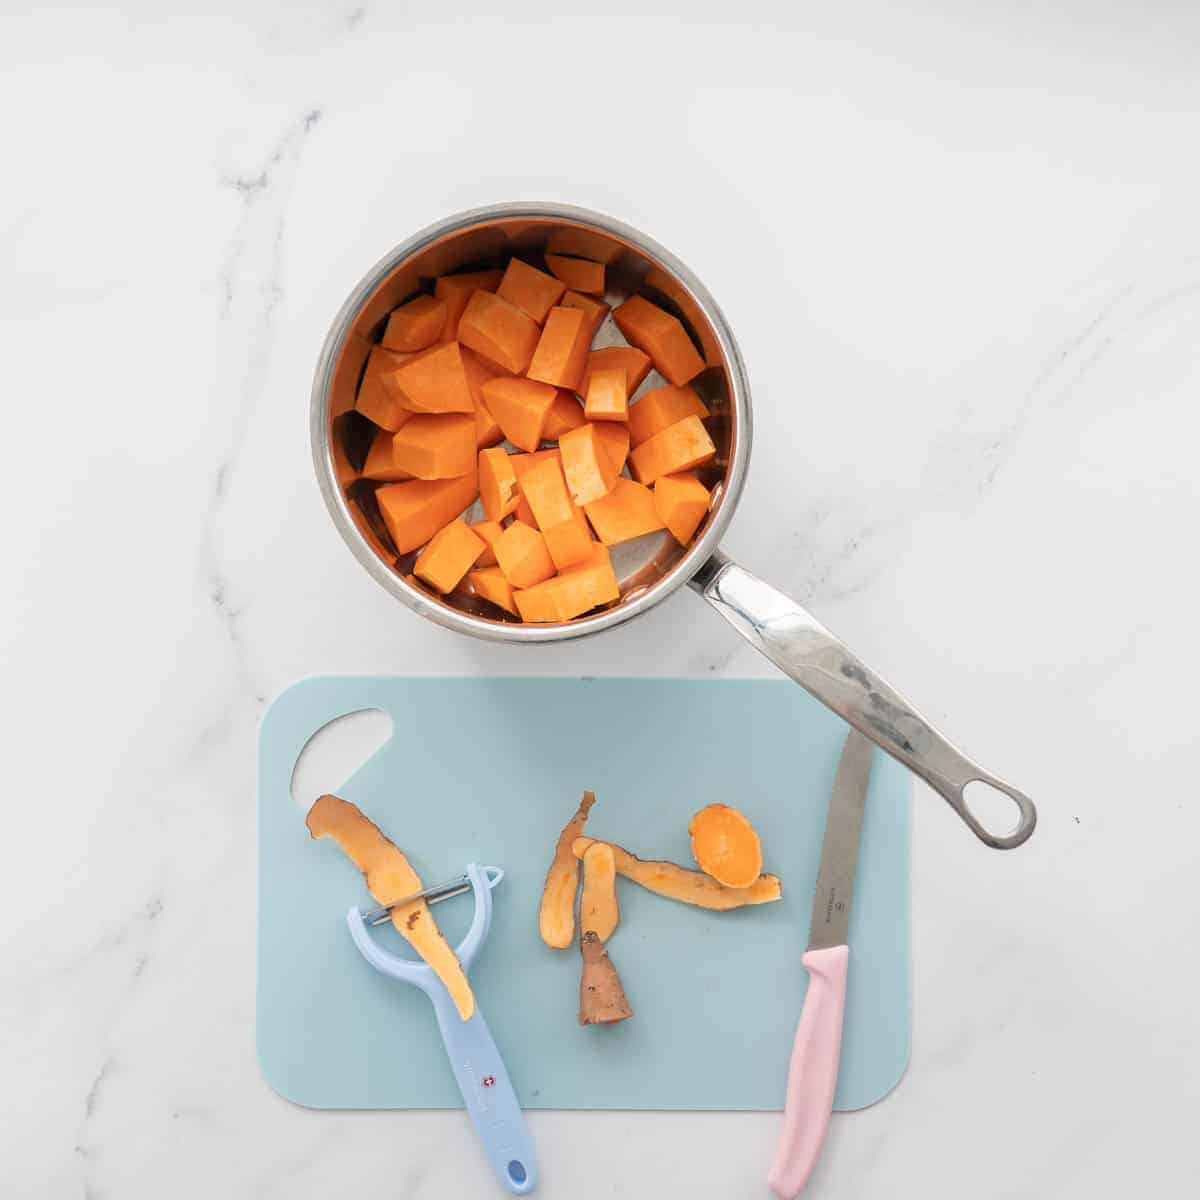 On the bench you see a pot with peeled and chopped sweet potato in front of a blue chopping board with a blue peeler and peel and a pink vege knife